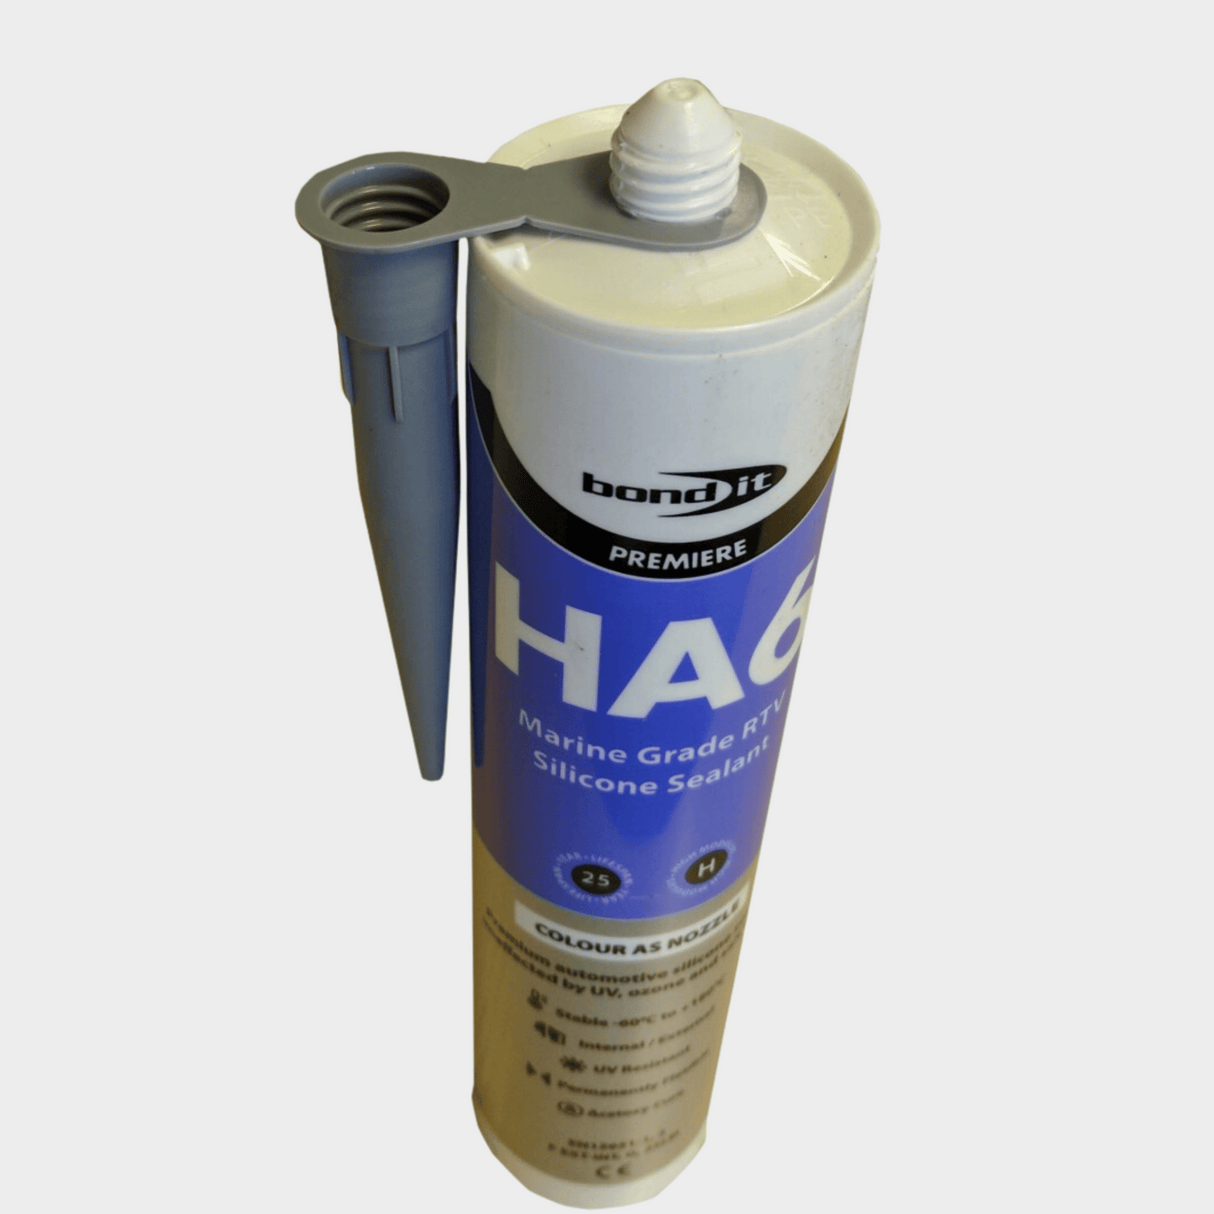 Samsung Silicon Grey Sealant (Pc) for Duct Sealing and Waterproofing